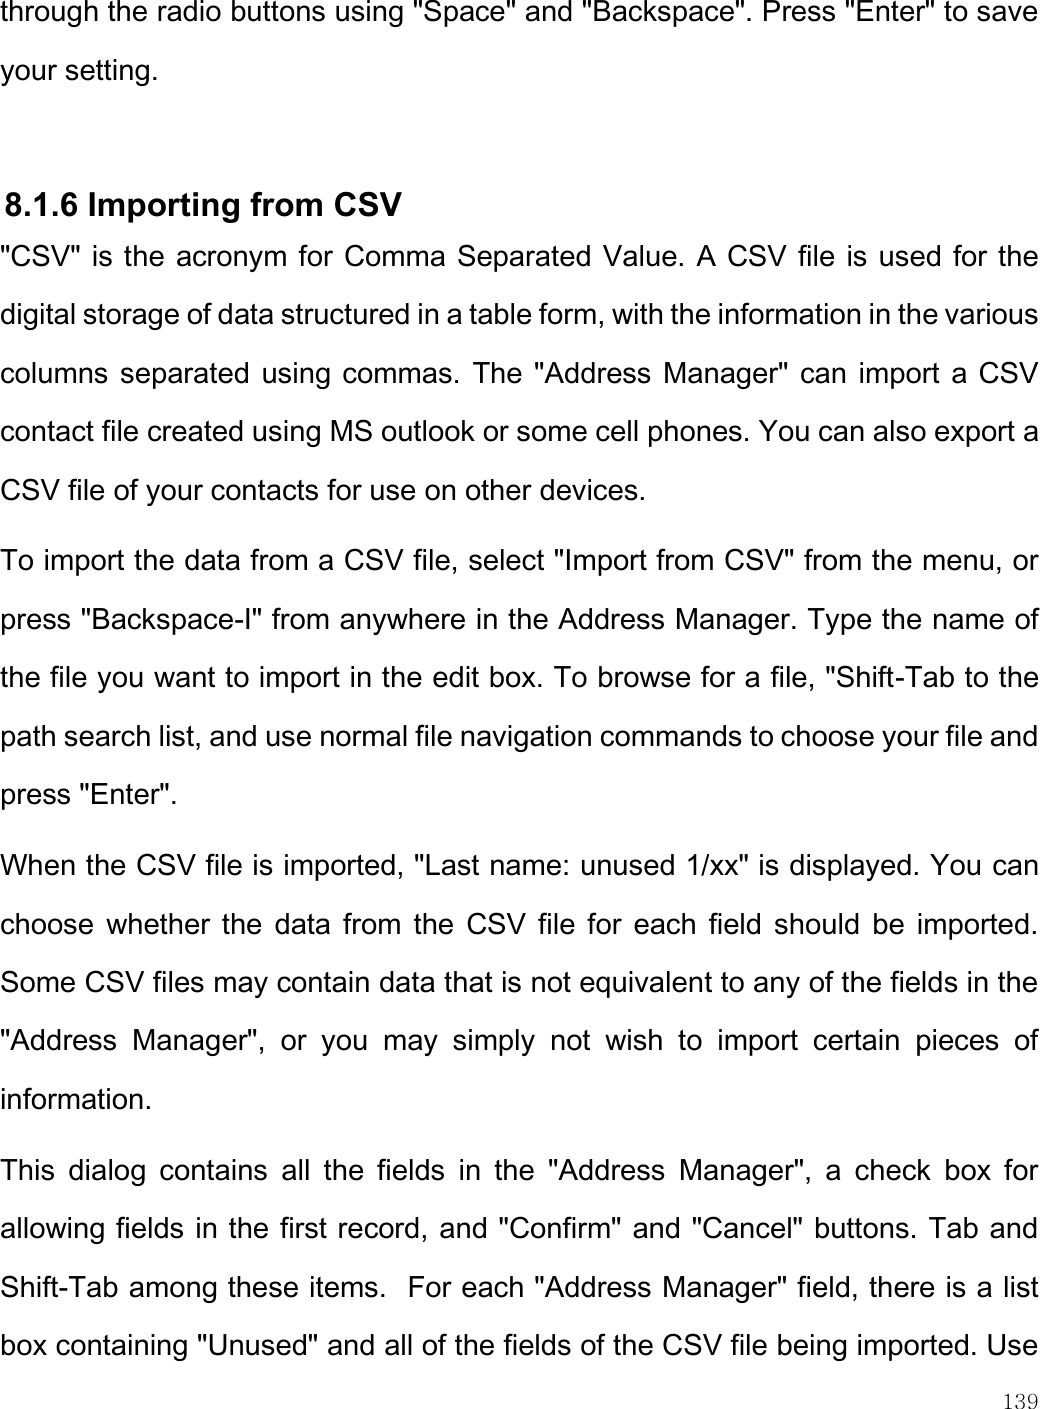    139  through the radio buttons using &quot;Space&quot; and &quot;Backspace&quot;. Press &quot;Enter&quot; to save your setting.  8.1.6 Importing from CSV &quot;CSV&quot; is the acronym for Comma Separated Value. A CSV file is used for the digital storage of data structured in a table form, with the information in the various columns separated using commas. The &quot;Address Manager&quot; can import a CSV contact file created using MS outlook or some cell phones. You can also export a CSV file of your contacts for use on other devices. To import the data from a CSV file, select &quot;Import from CSV&quot; from the menu, or press &quot;Backspace-I&quot; from anywhere in the Address Manager. Type the name of the file you want to import in the edit box. To browse for a file, &quot;Shift-Tab to the path search list, and use normal file navigation commands to choose your file and press &quot;Enter&quot;.  When the CSV file is imported, &quot;Last name: unused 1/xx&quot; is displayed. You can choose whether the data from the CSV file for  each field should be imported. Some CSV files may contain data that is not equivalent to any of the fields in the &quot;Address  Manager&quot;,  or  you  may  simply  not  wish  to  import  certain  pieces  of information.   This  dialog  contains  all  the  fields  in  the  &quot;Address  Manager&quot;,  a  check  box  for allowing fields in the first record, and &quot;Confirm&quot; and &quot;Cancel&quot; buttons. Tab and Shift-Tab among these items.  For each &quot;Address Manager&quot; field, there is a list box containing &quot;Unused&quot; and all of the fields of the CSV file being imported. Use 